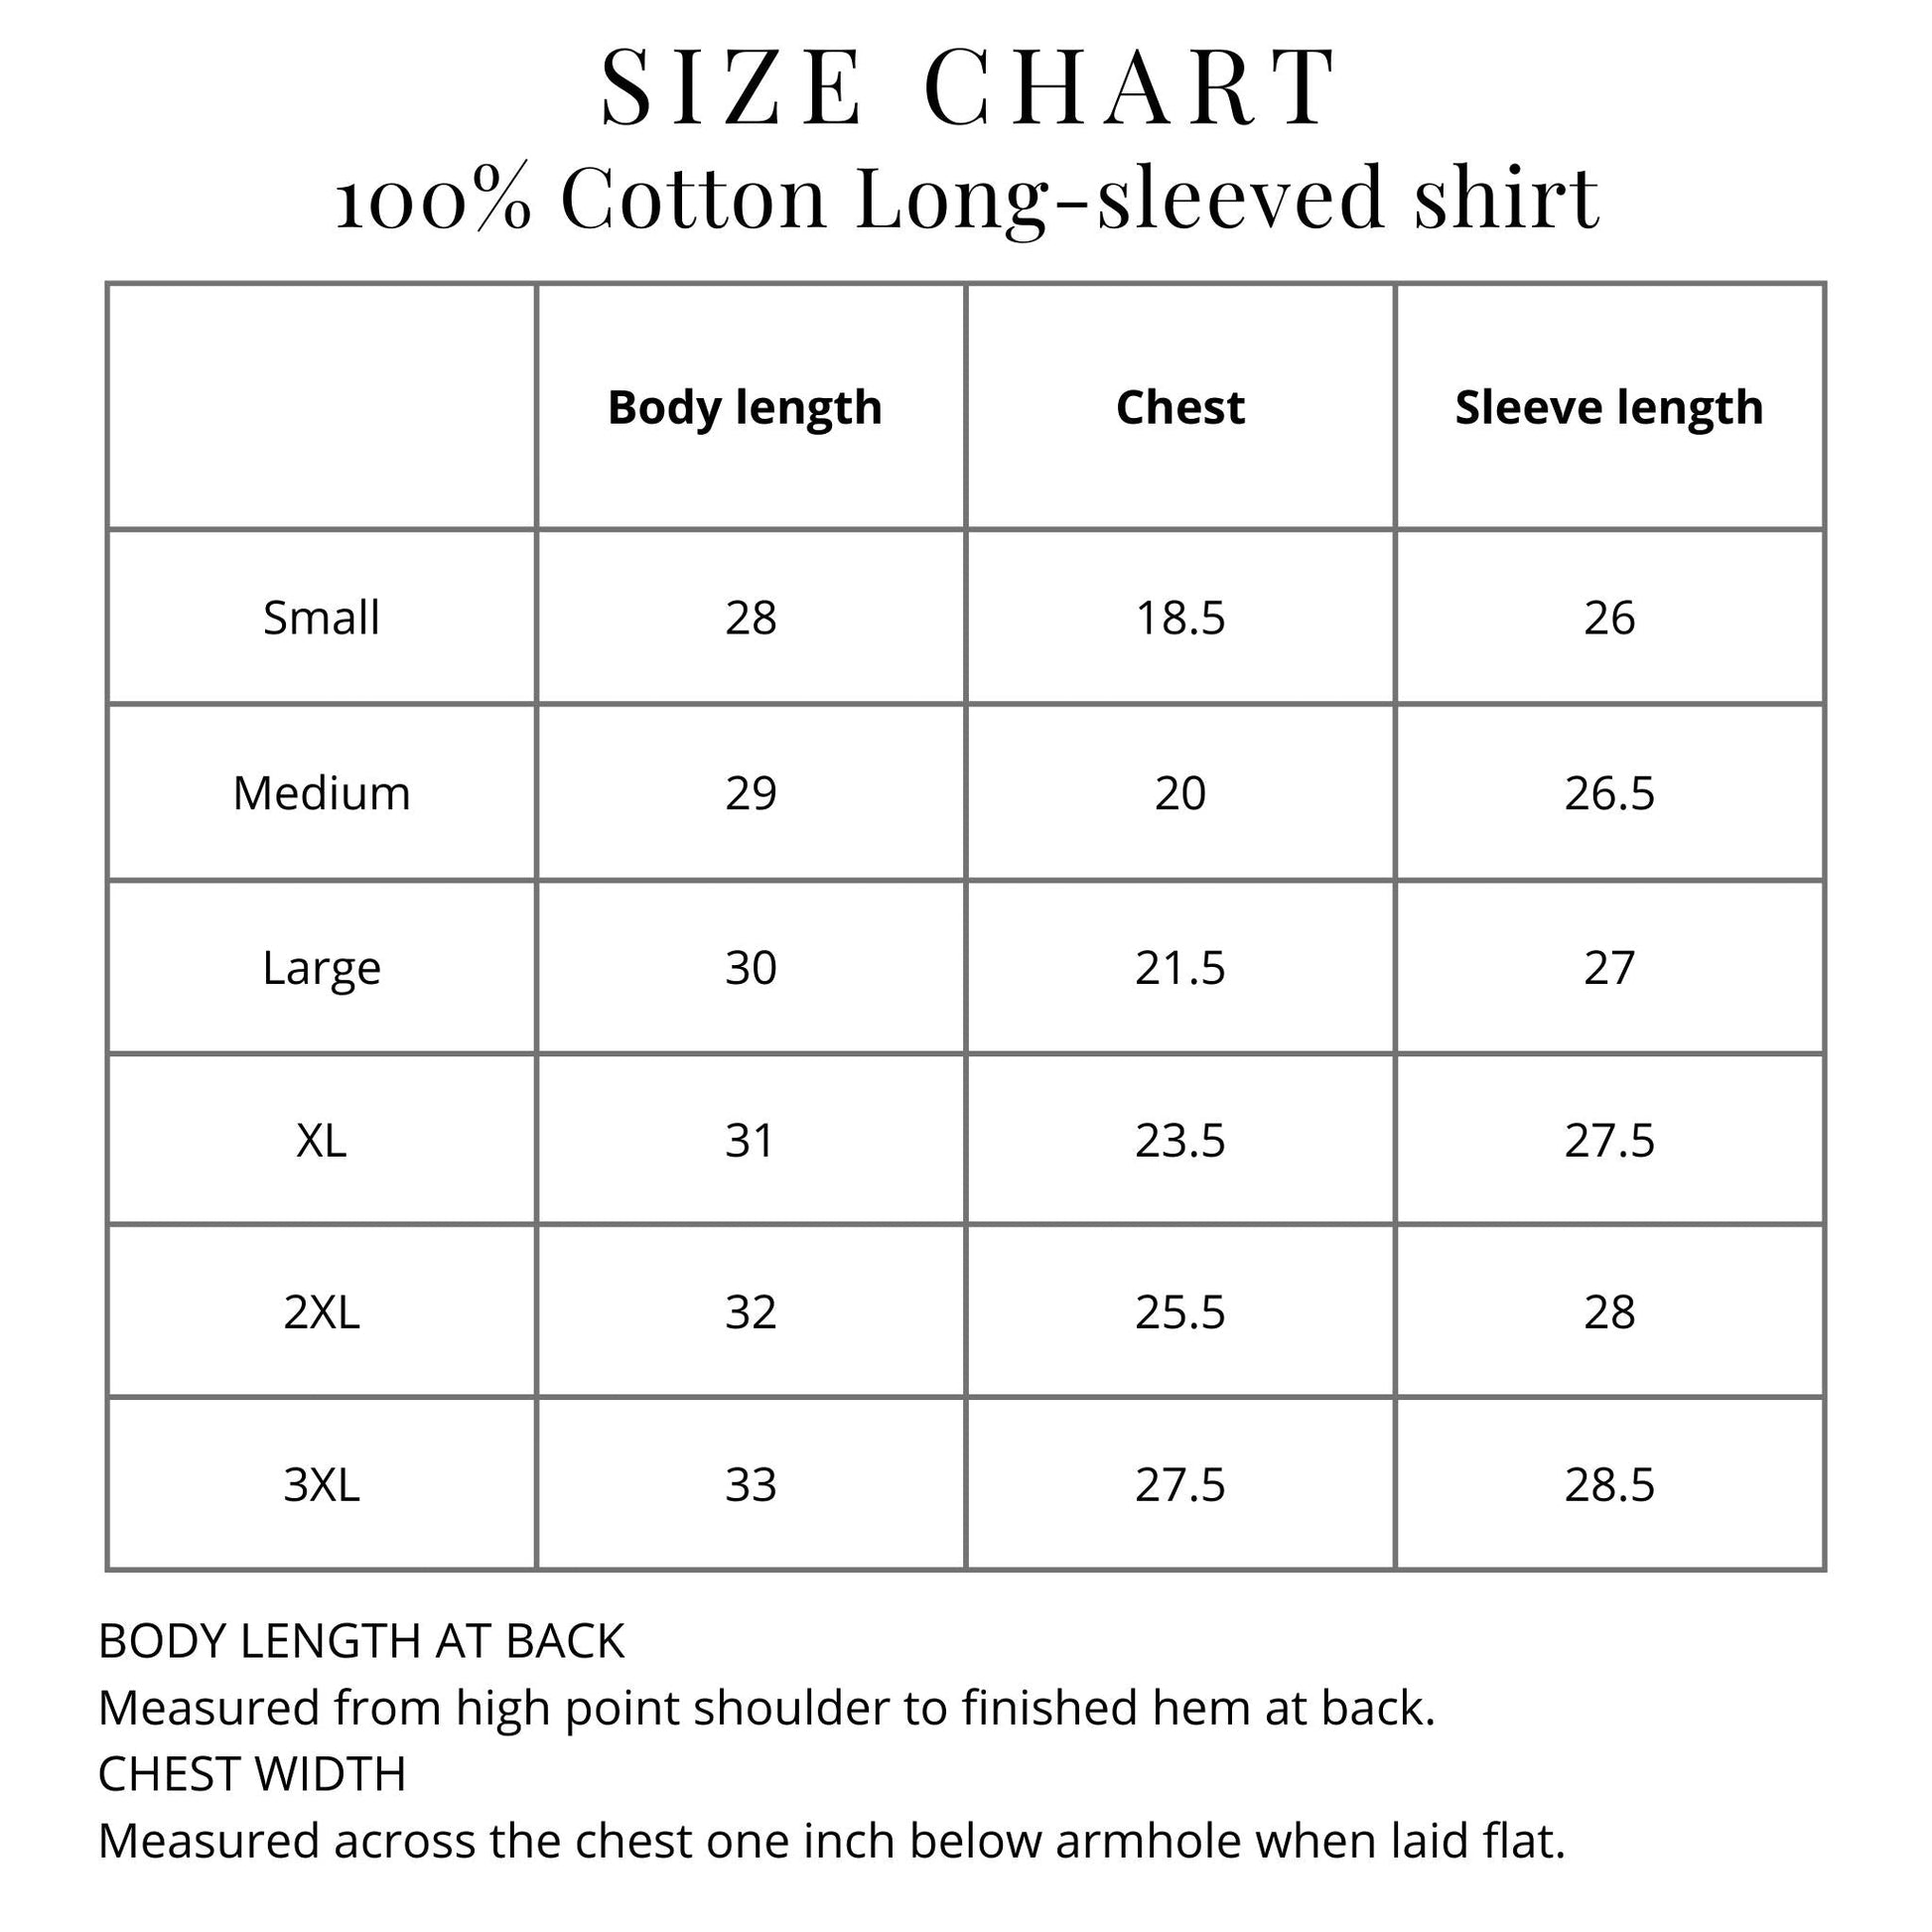 Size chart for 100% cotton long-sleeved shirt from The History List store